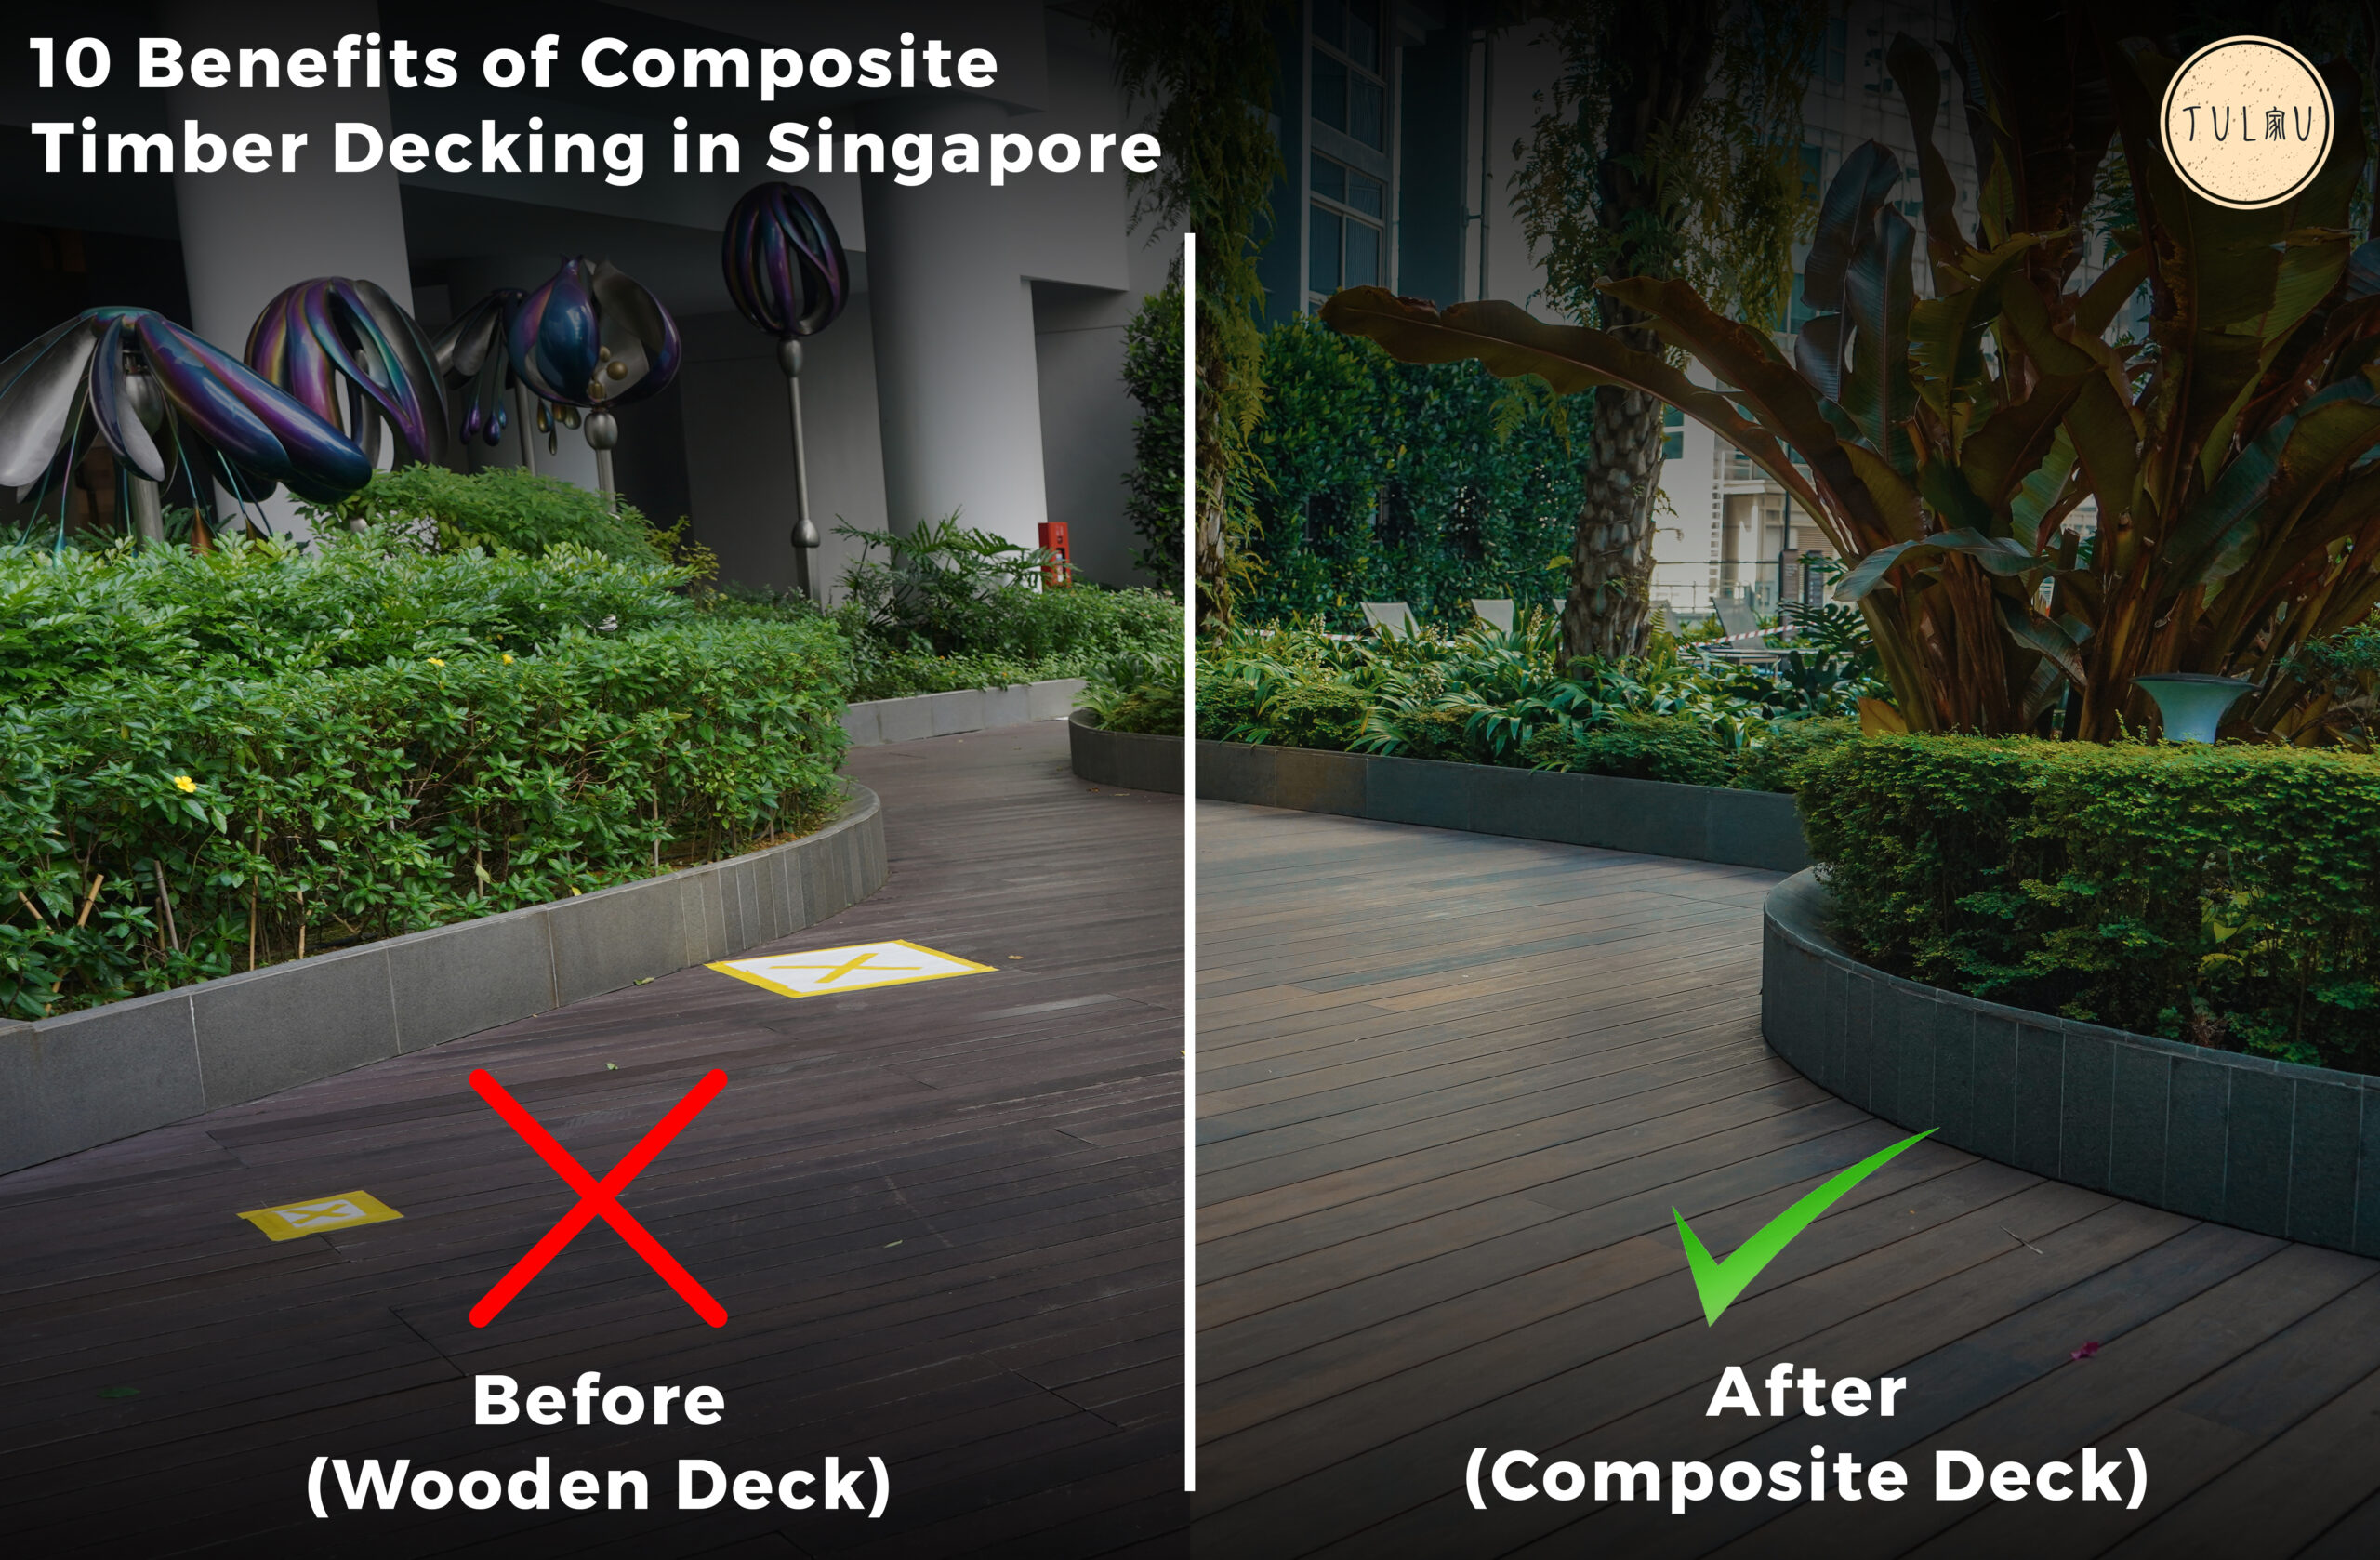 10 Benefits of Choosing Composite Timber Decking for Your Home in Singapore scaled - 10 Benefits of Choosing Composite Timber Decking for Your Home in Singapore